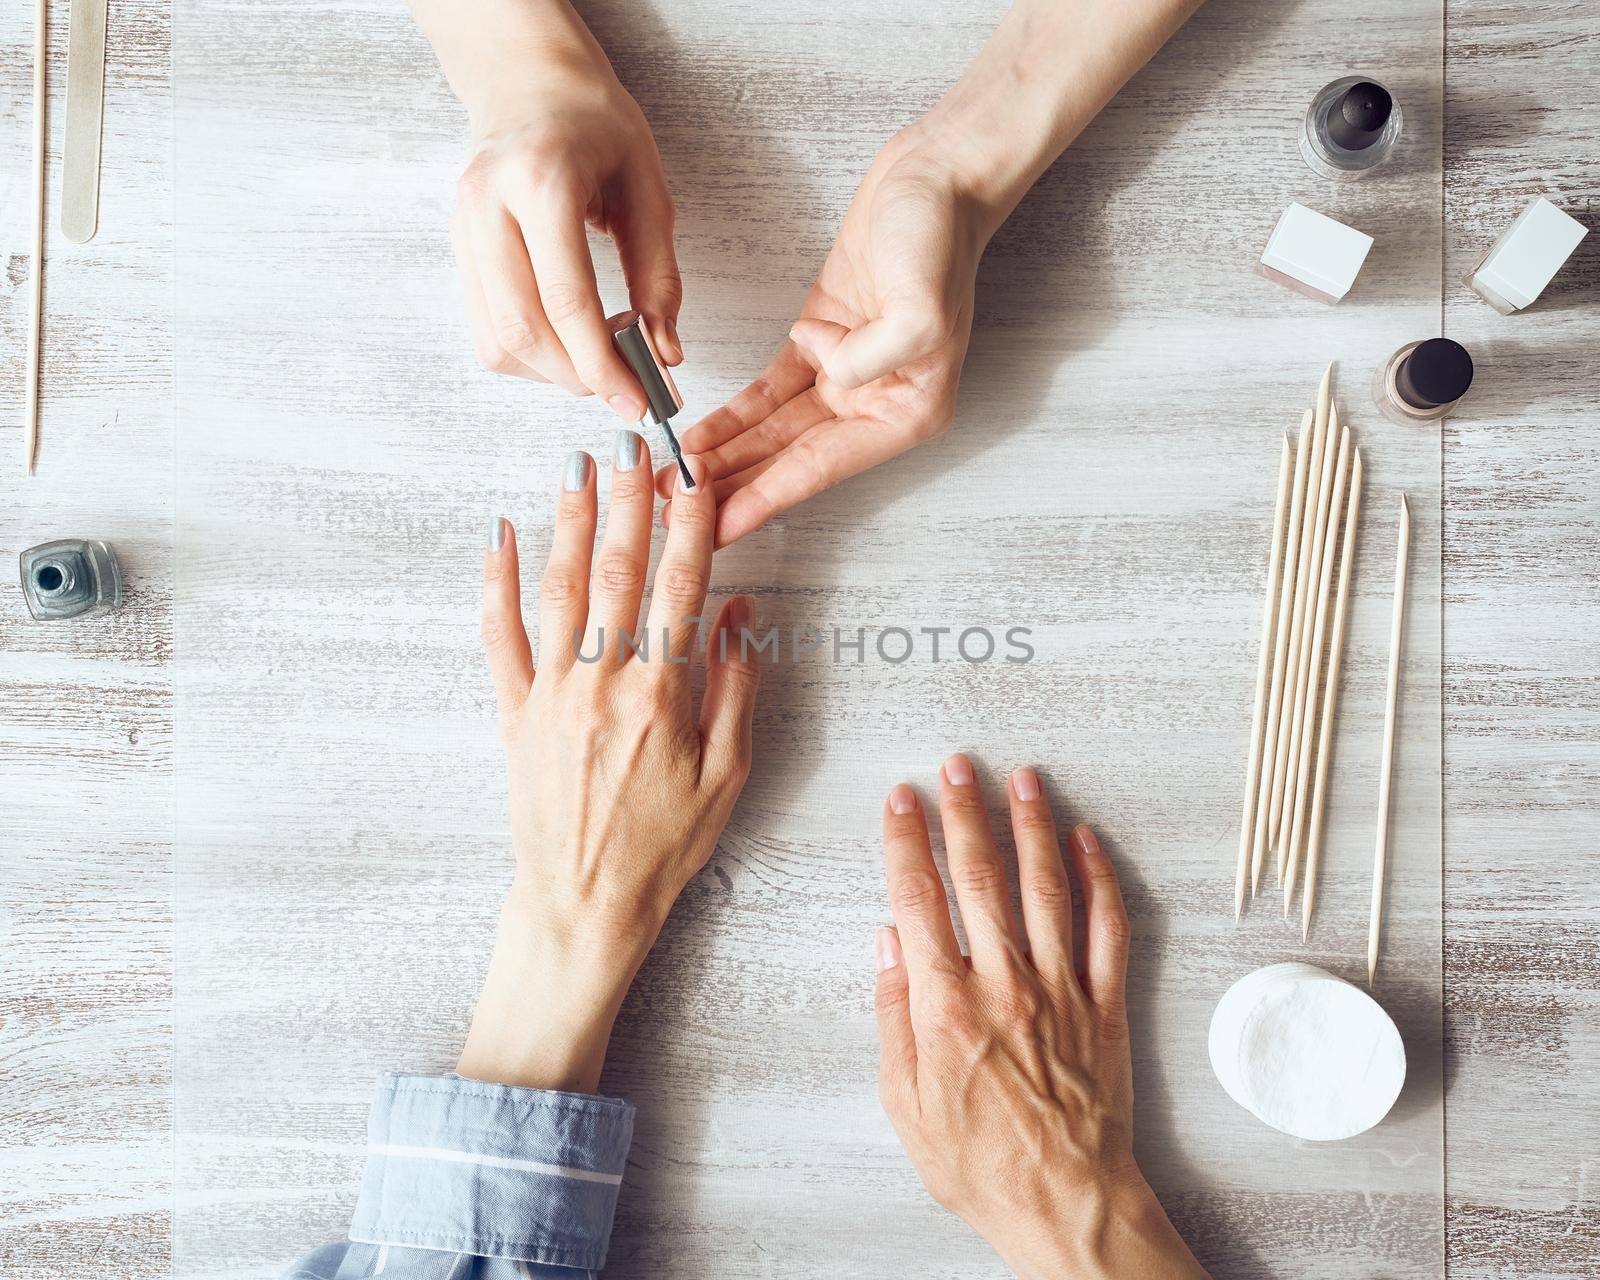 Mother and daughter do manicure, paint nails with varnish. Home care during quarantine, self-isolation. Top view of hands on table.